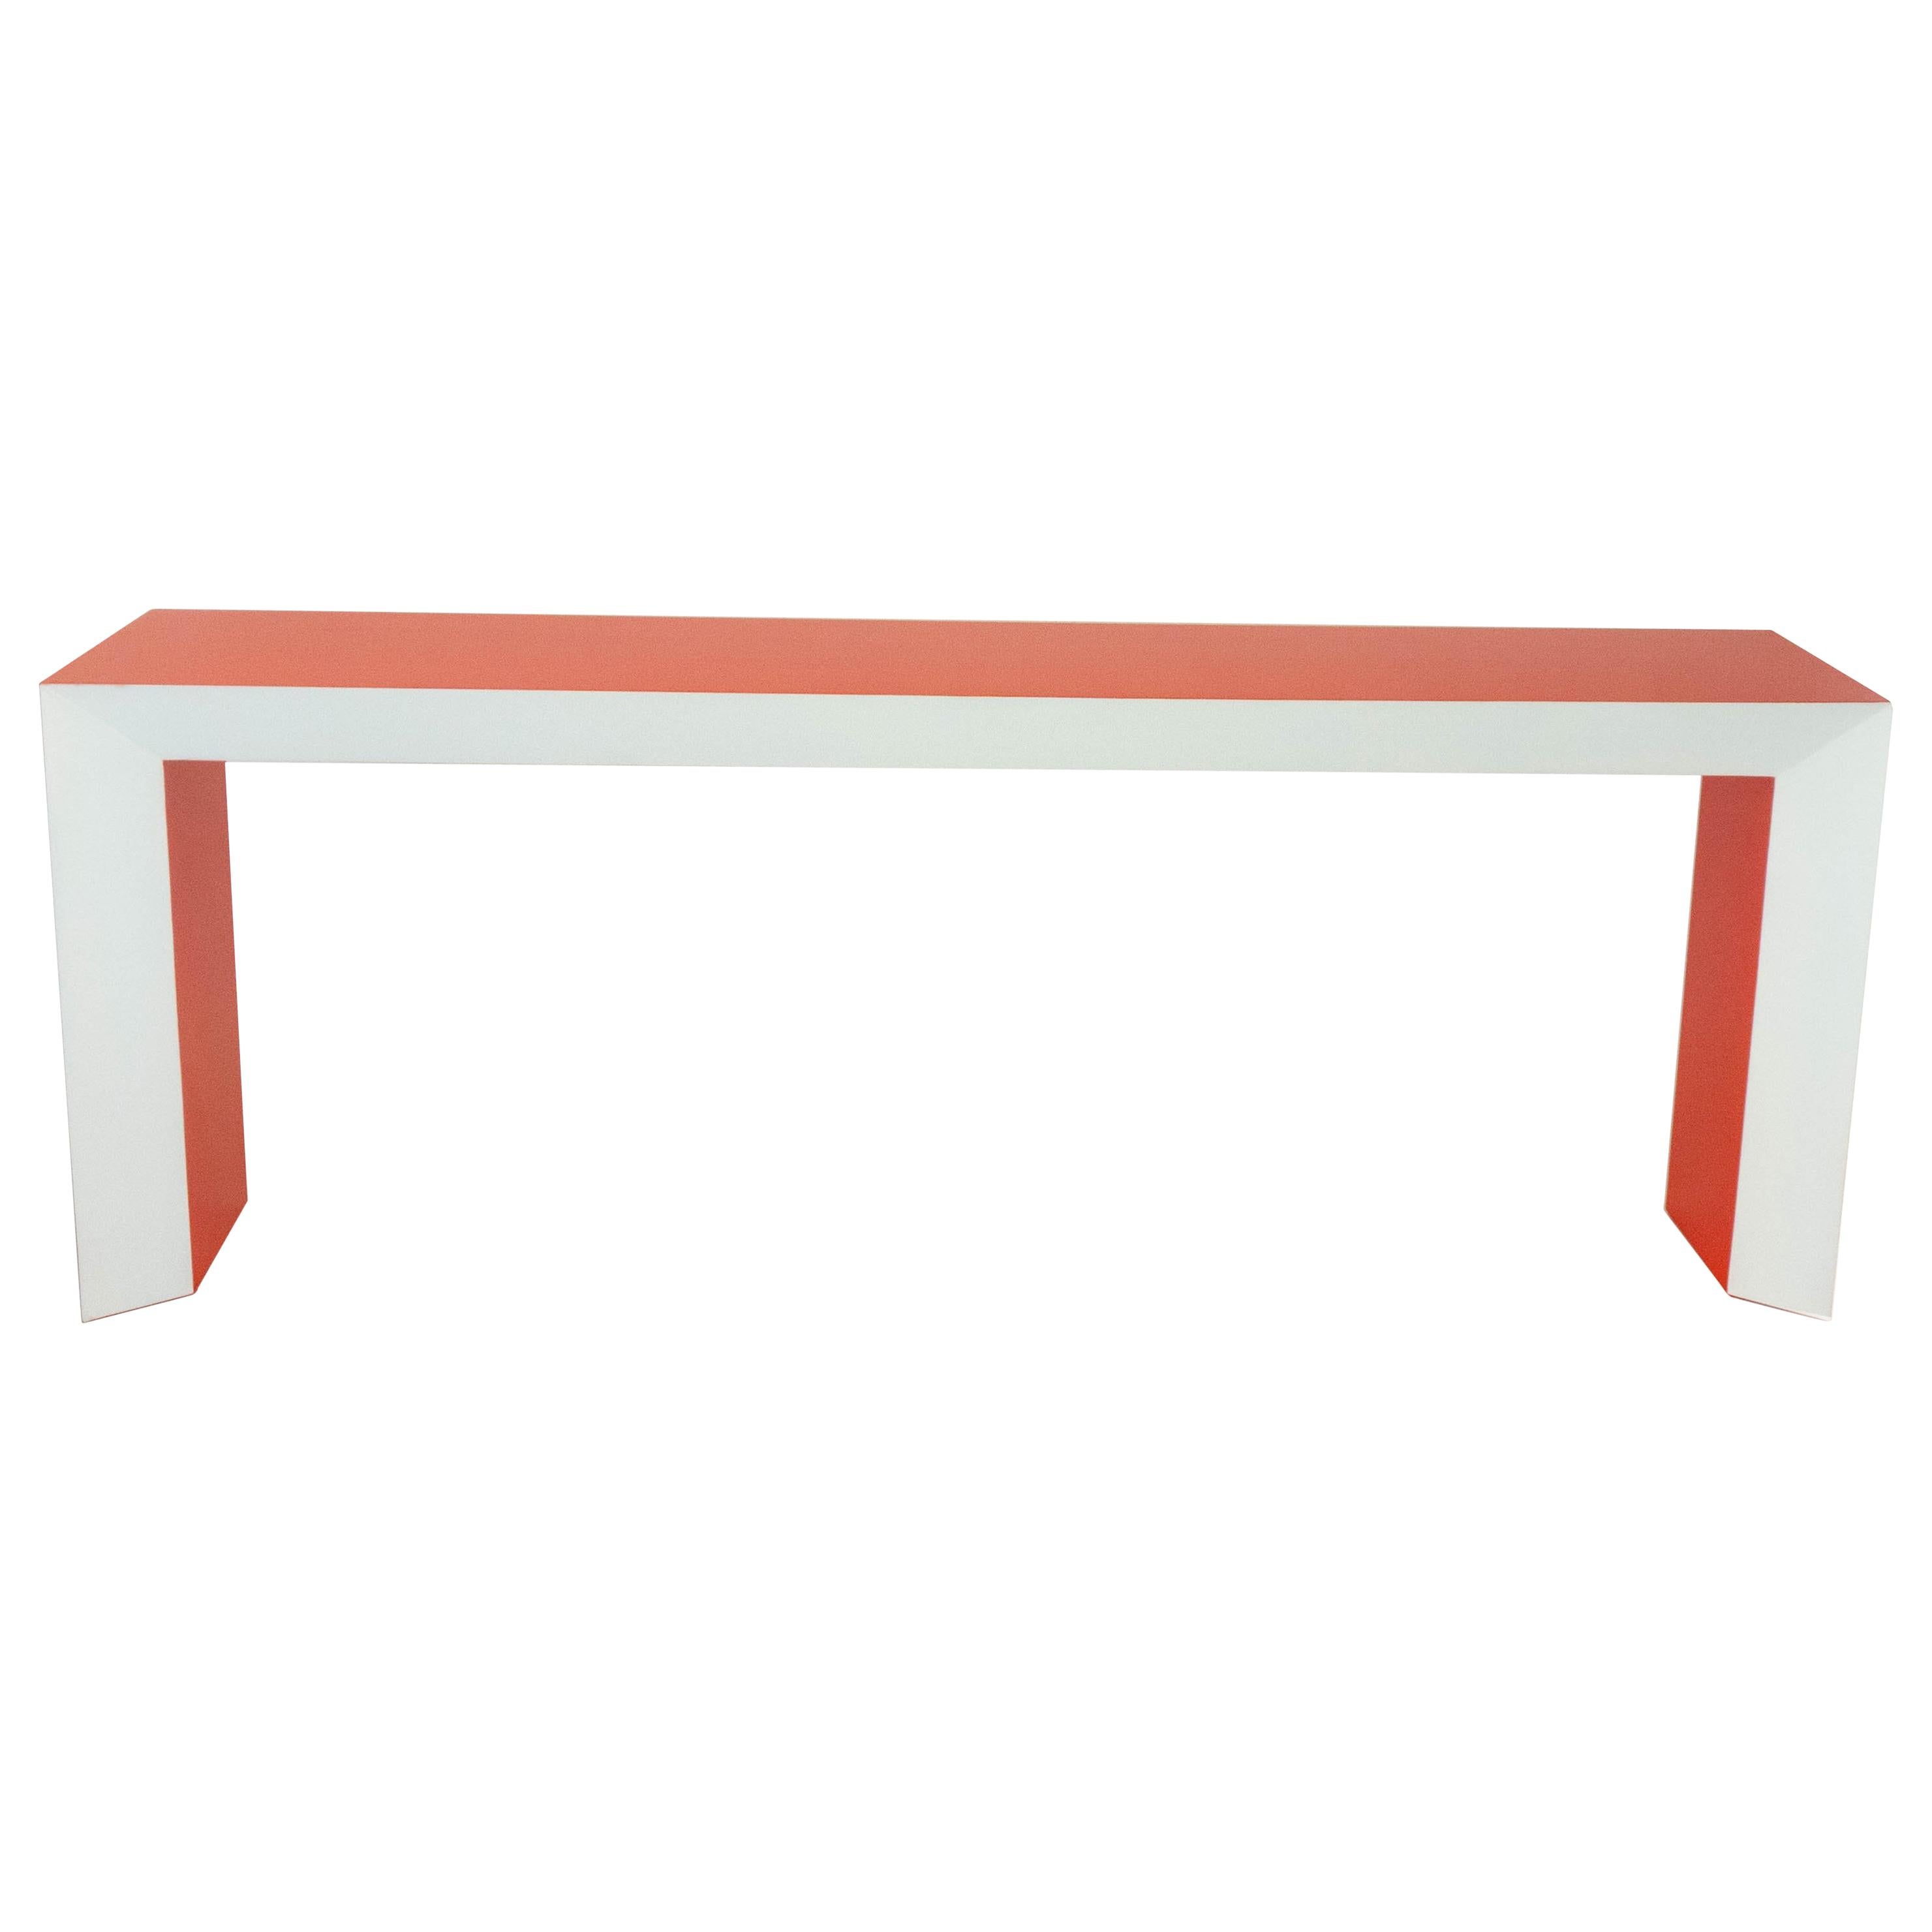 Orange and White Beveled Waterfall Table For Sale